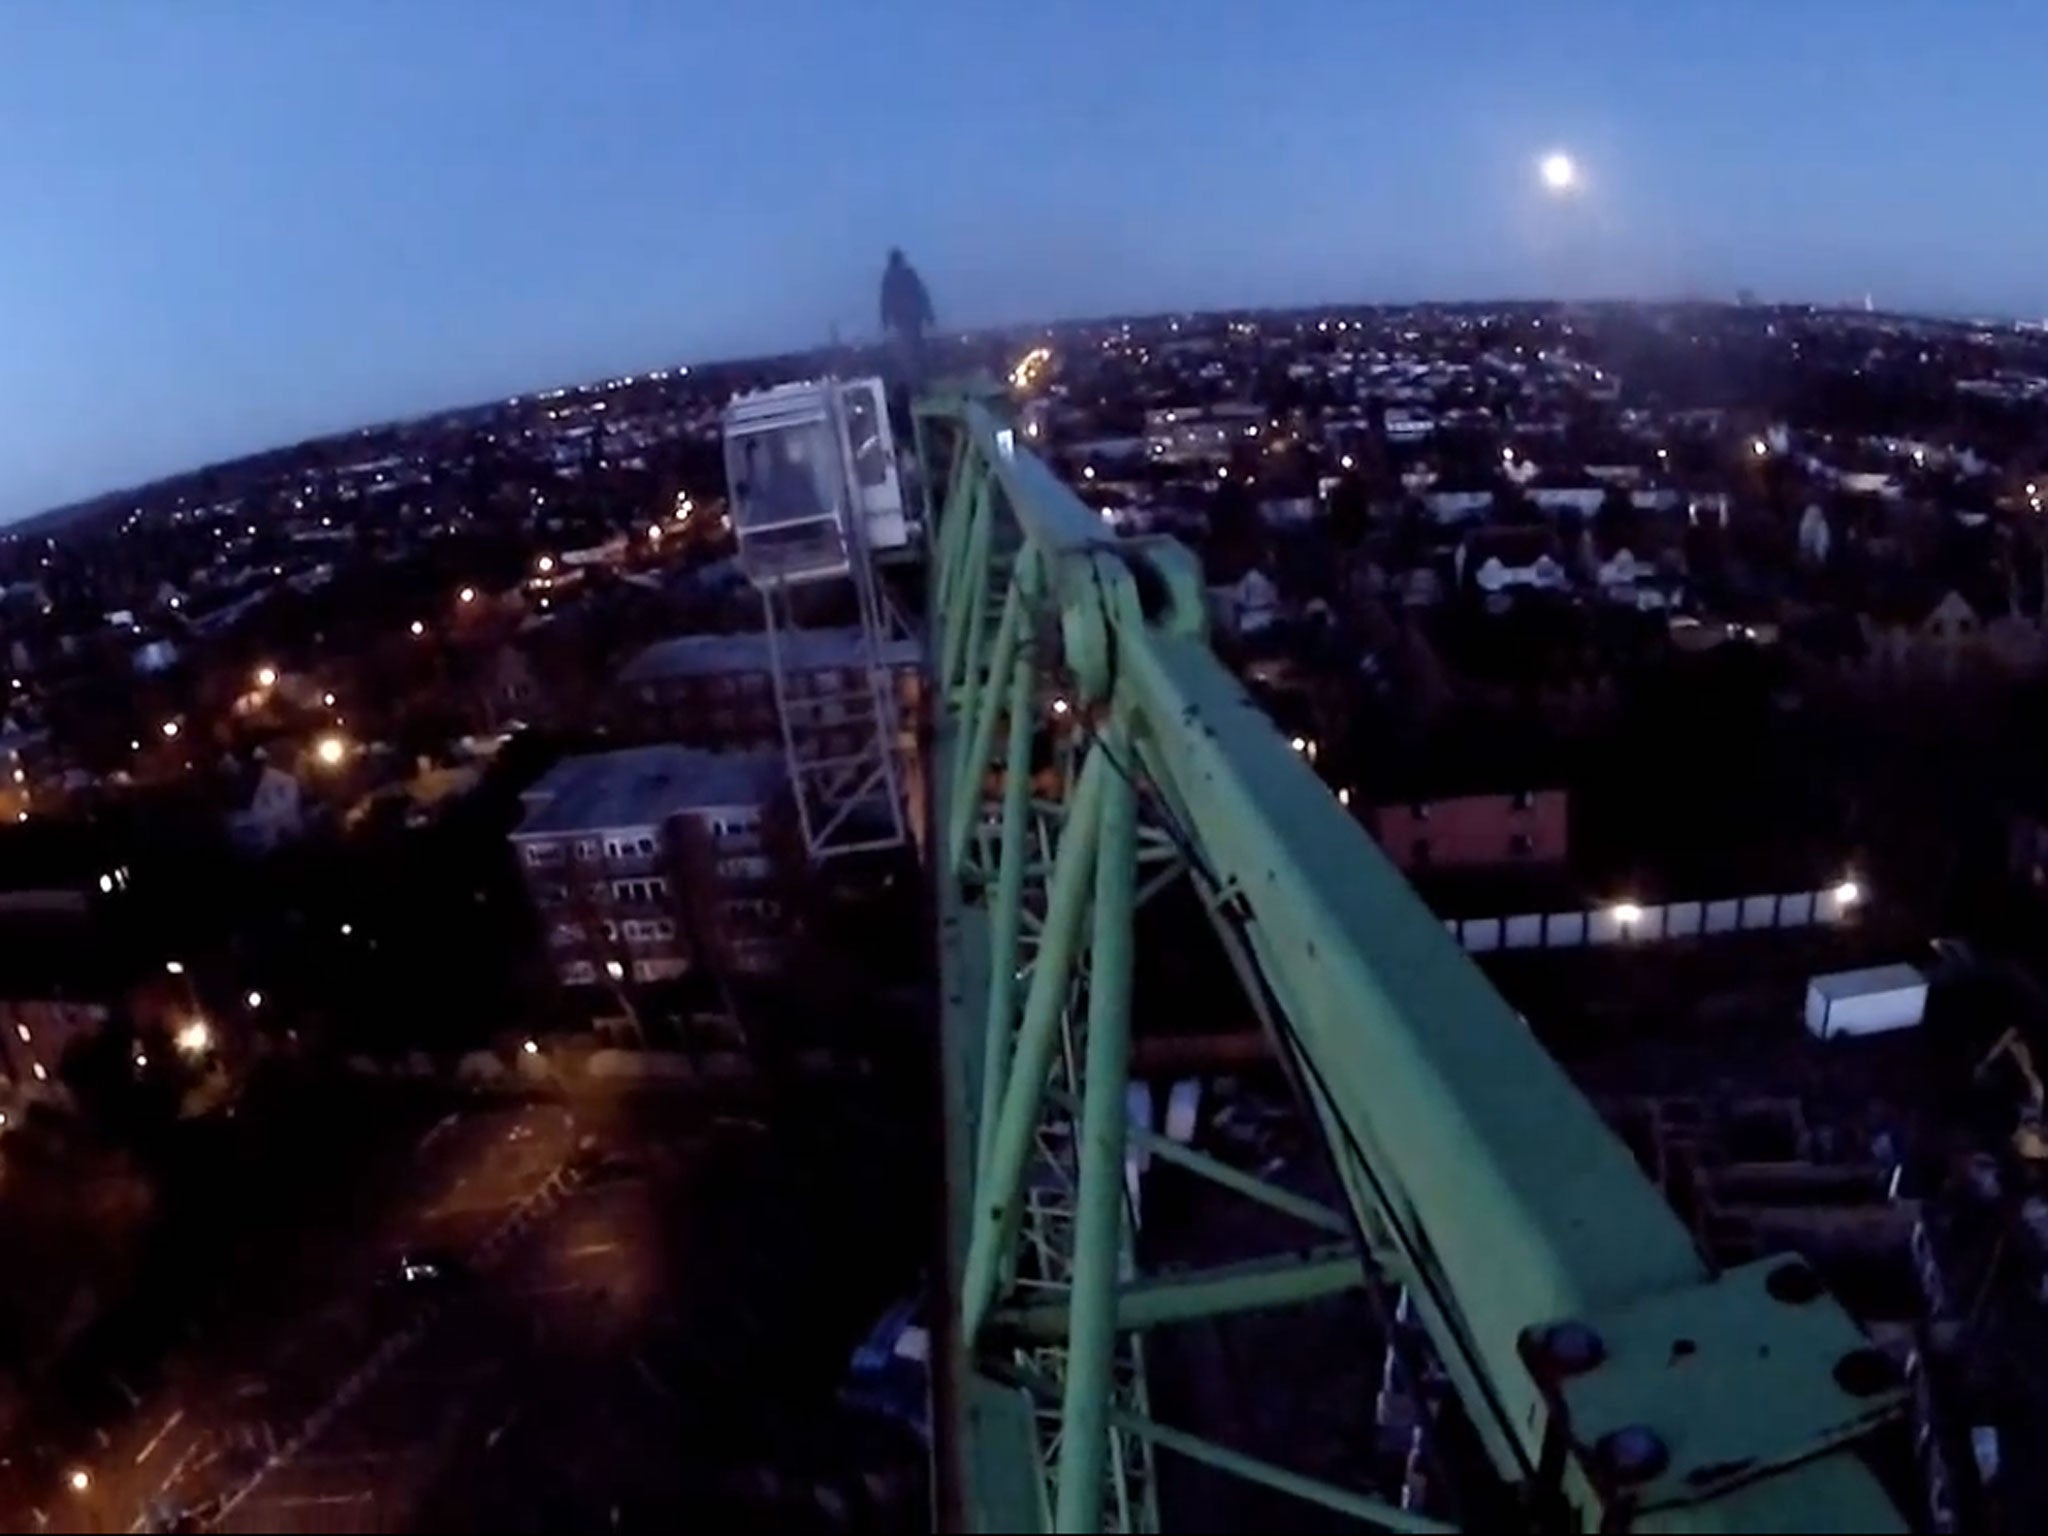 One of the climbers stands at the end of the crane, while he's filmed by others